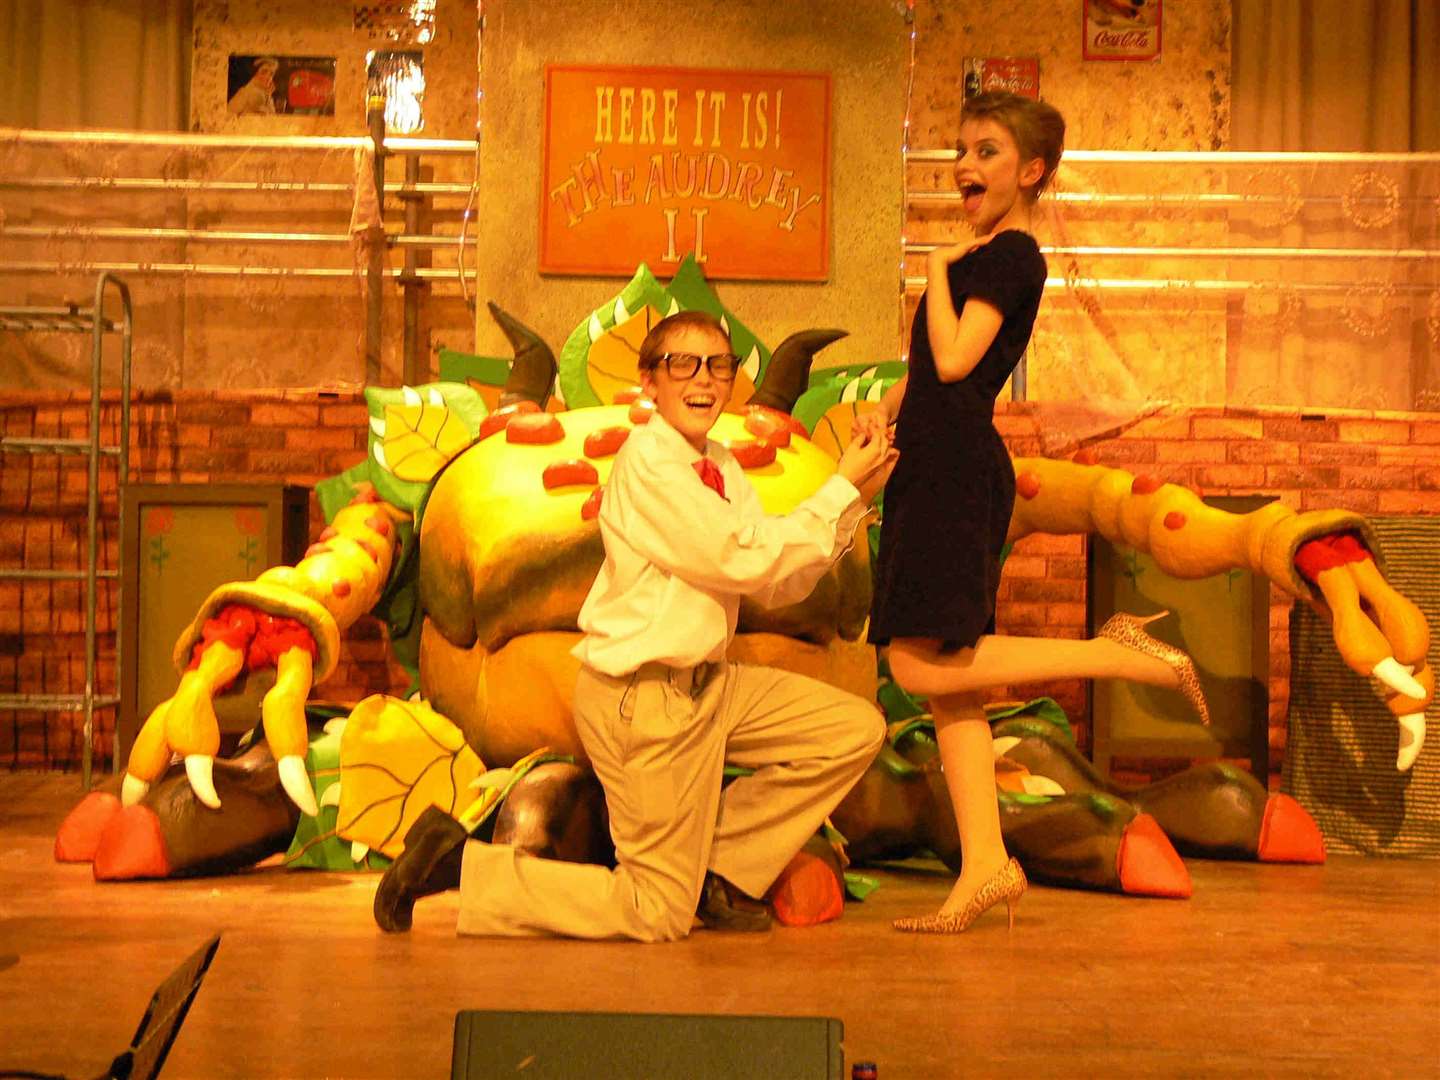 Alice Chater in action in the Little Shop of Horrors production in Broadstairs in 2007